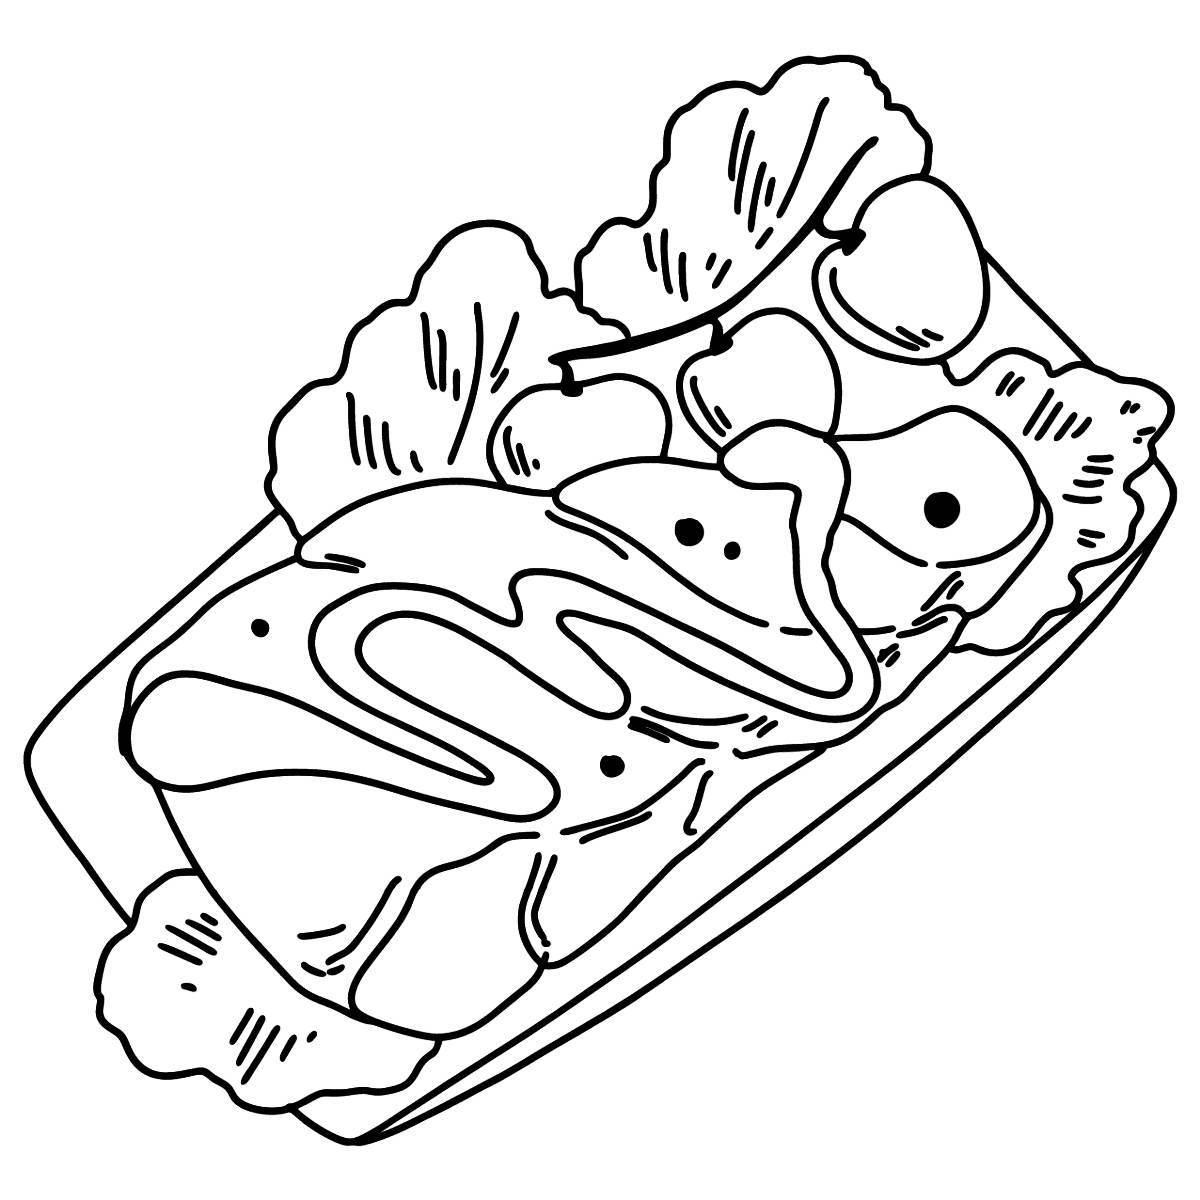 Nutritious salad coloring page